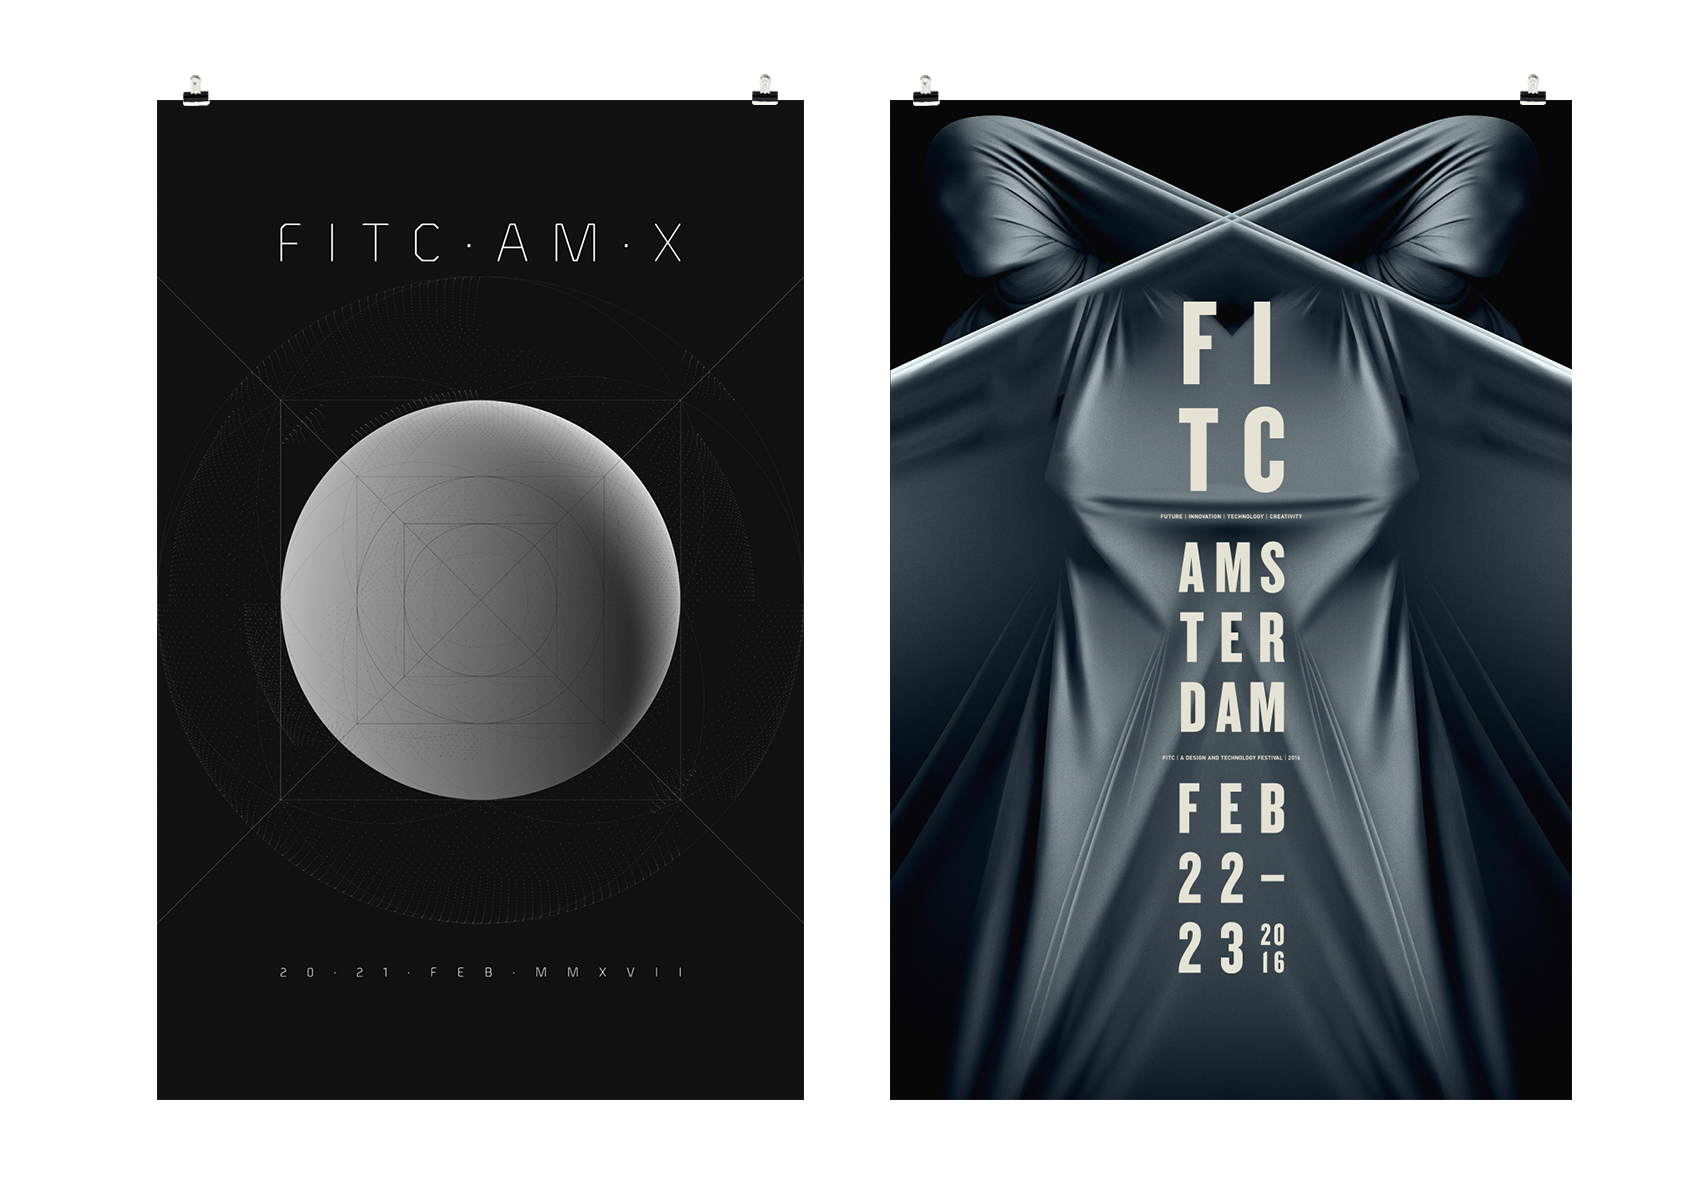 FITC posters 2008-2017